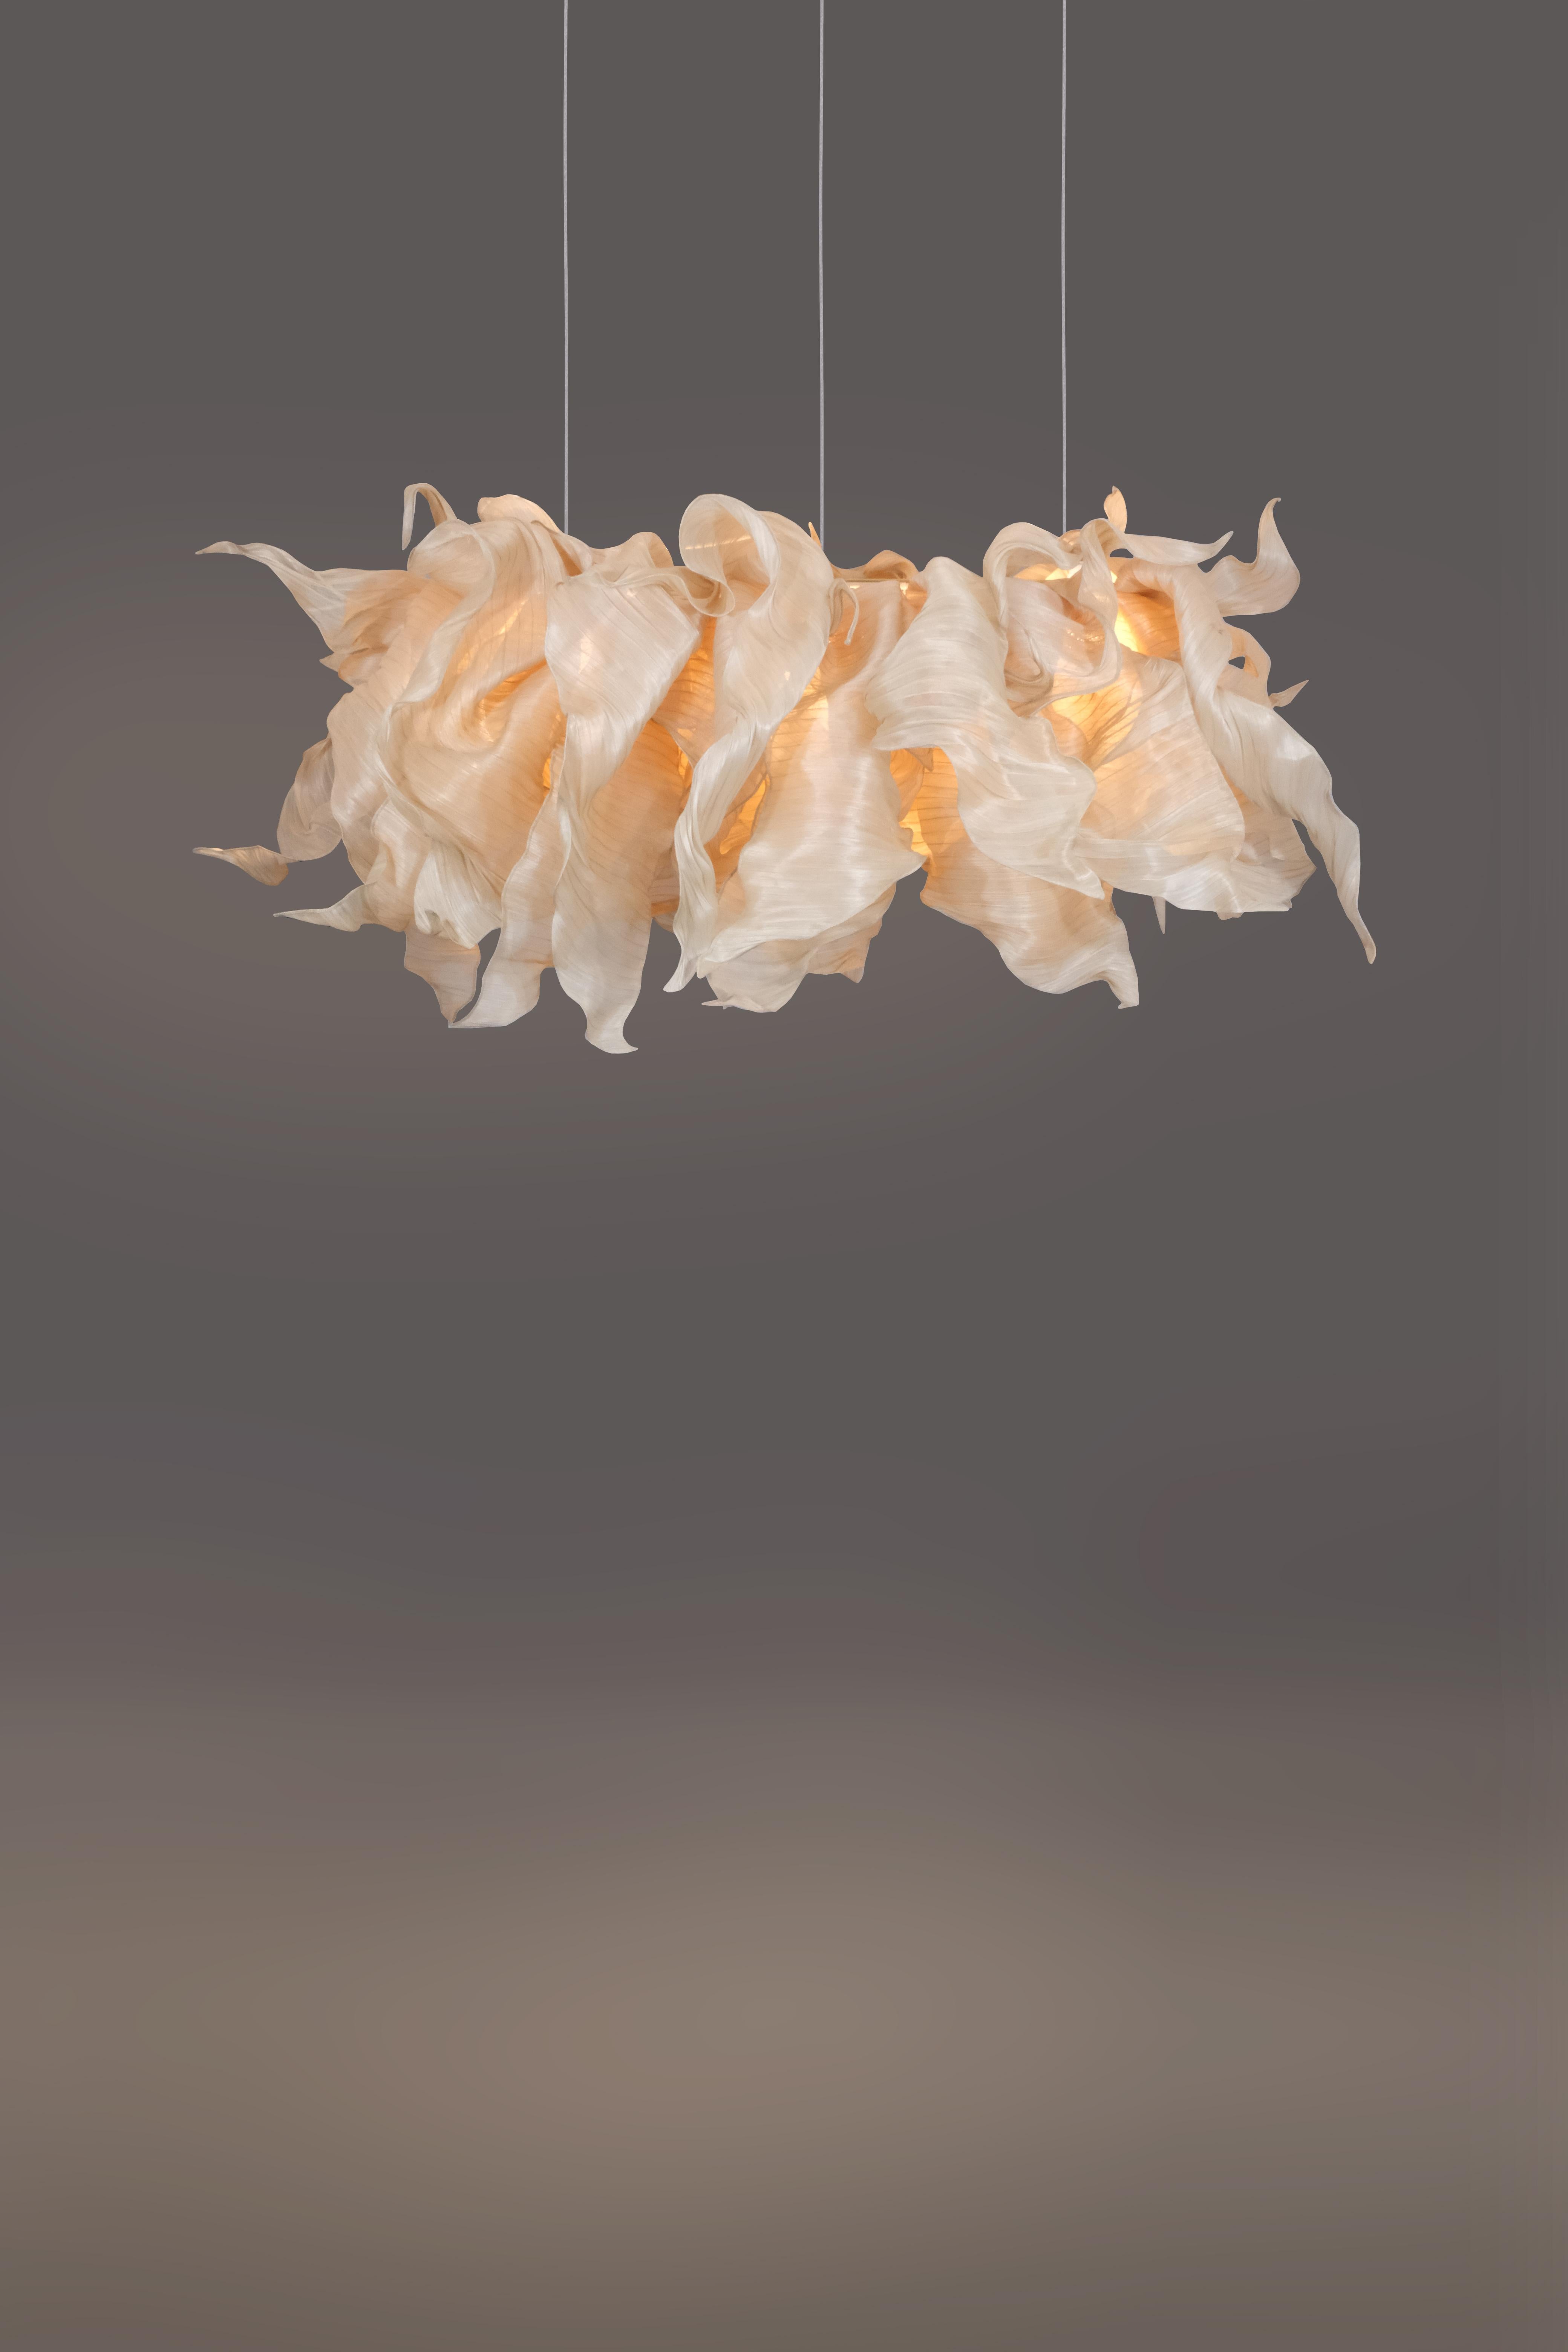 Hand-Woven Modern Sculptural Fabric Collectible Chandelier from Studio Mirei, Supernova For Sale